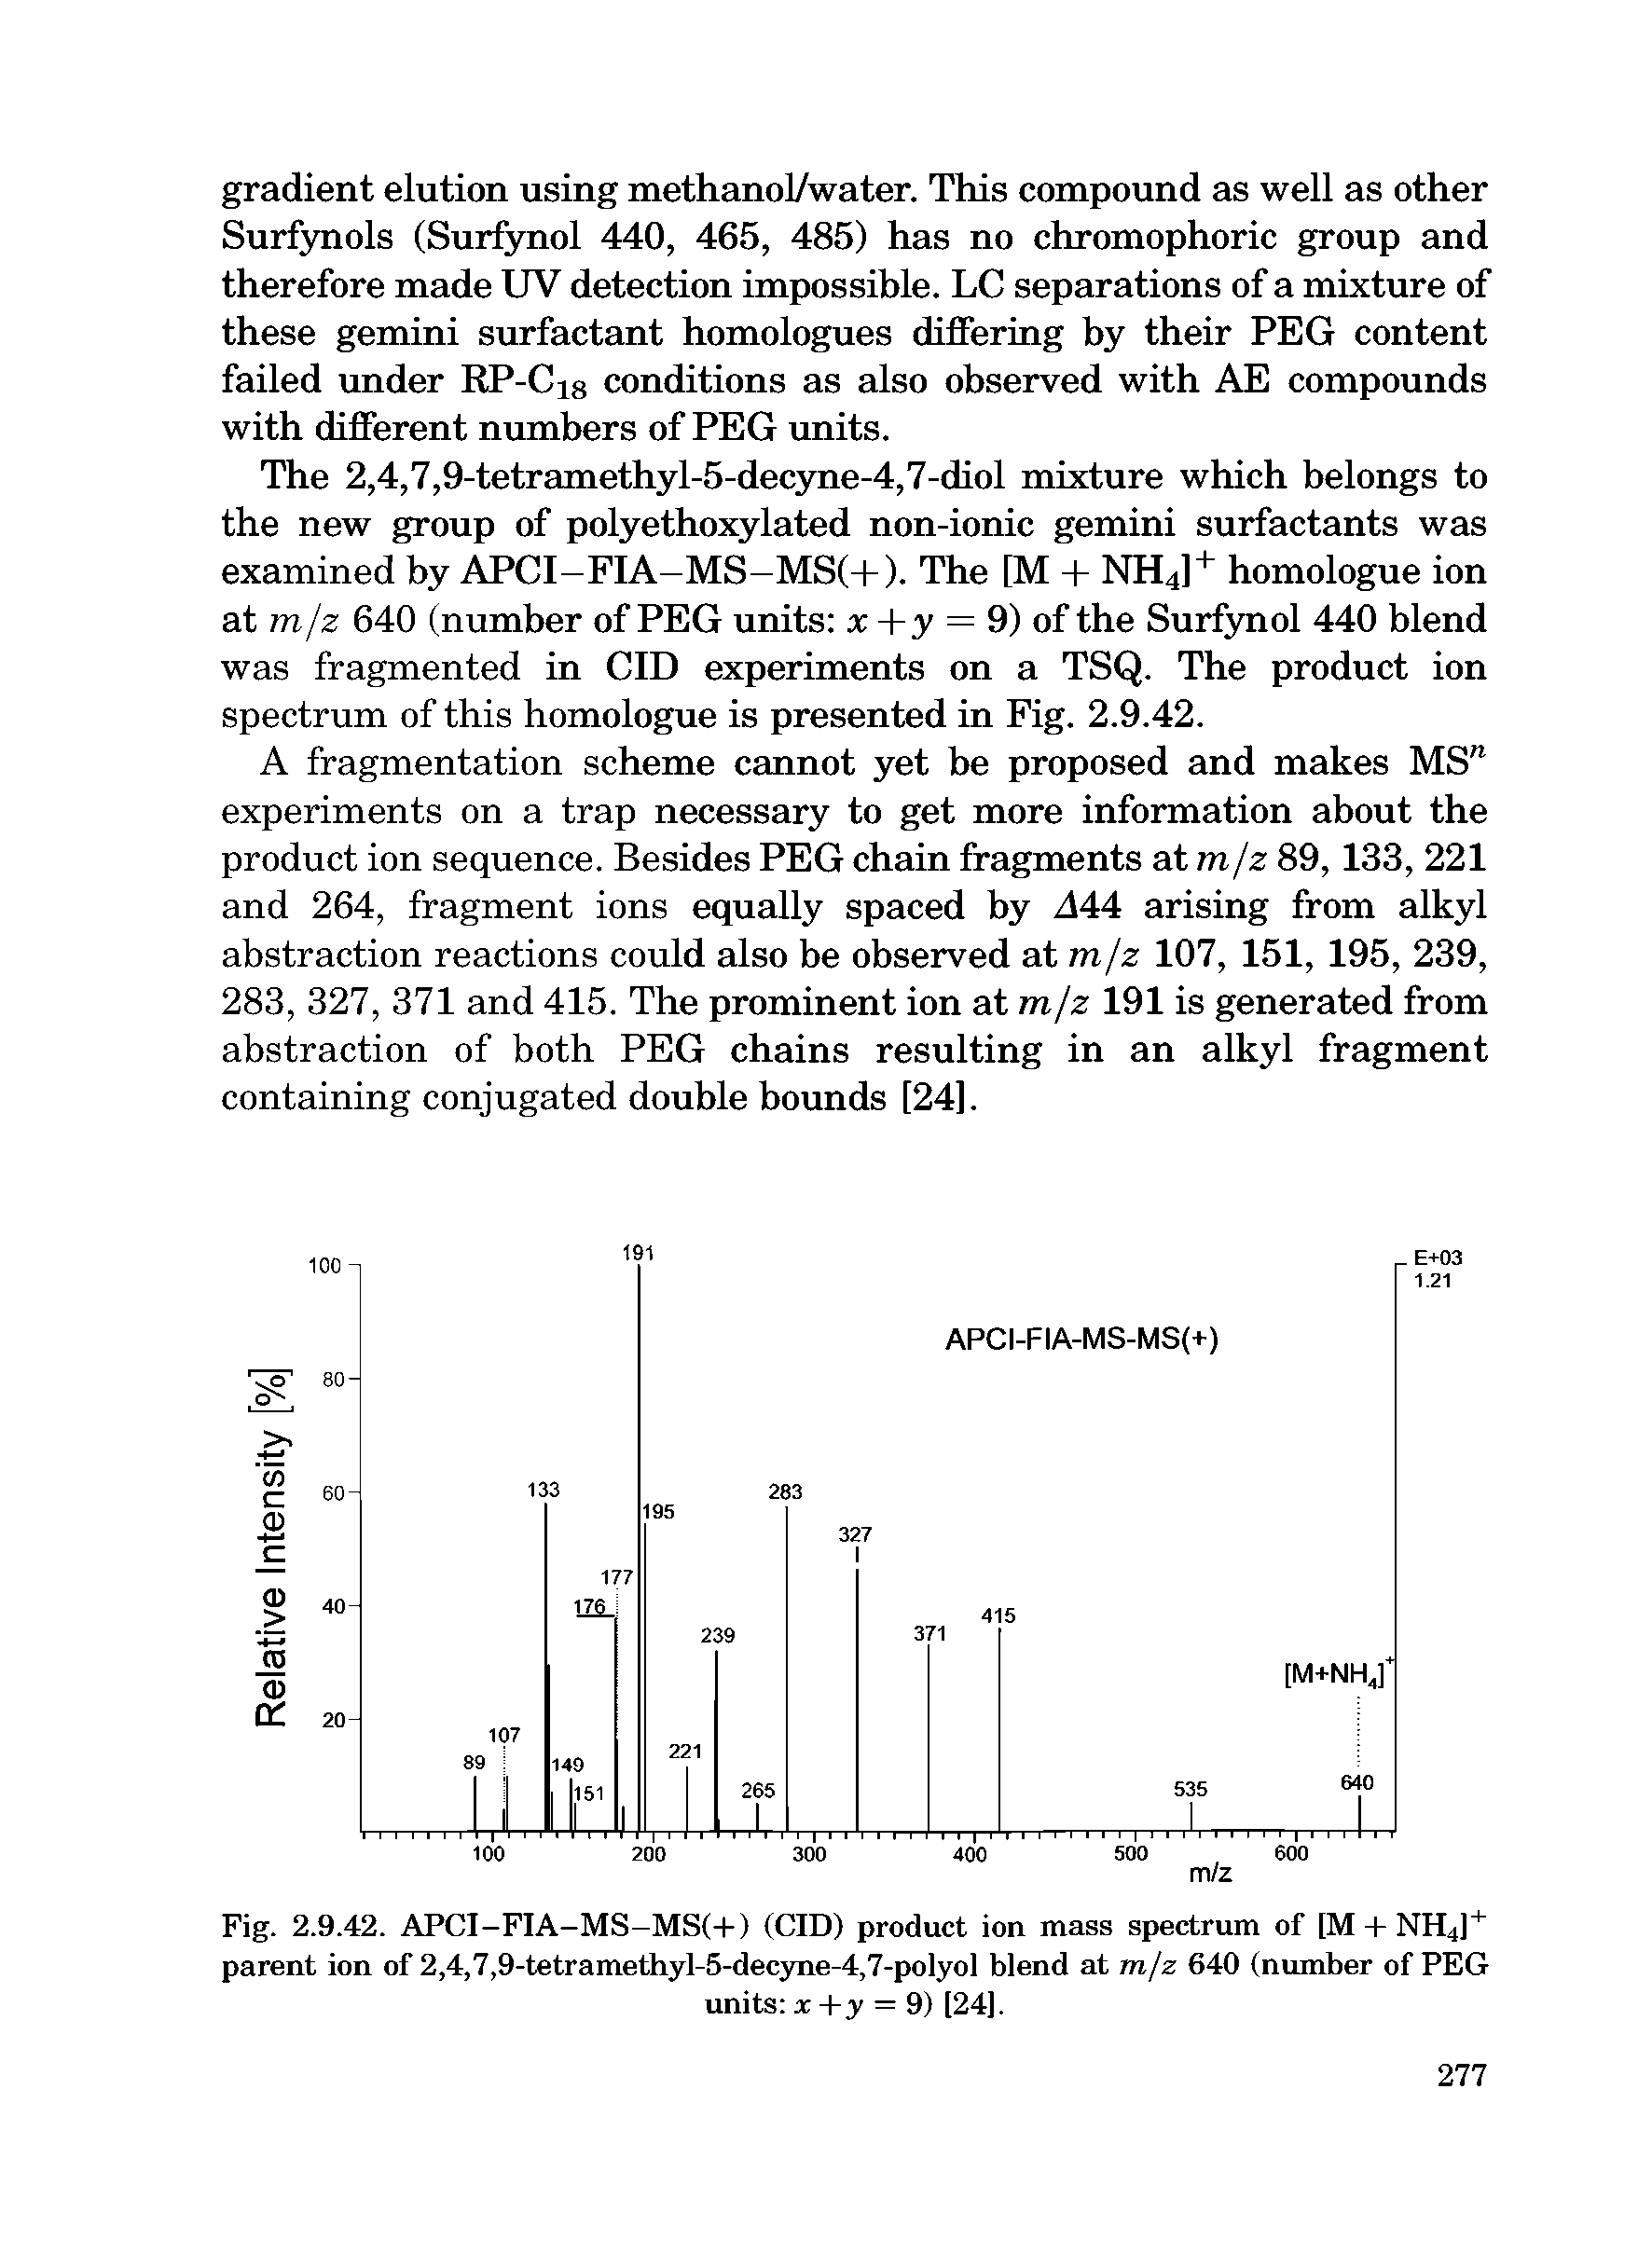 Fig. 2.9.42. APCI-FIA-MS-MS(+) (CID) product ion mass spectrum of [M + NH4]+ parent ion of 2,4,7,9-tetramethyl-5-decyne-4,7-polyol blend at m/z 640 (number of PEG...